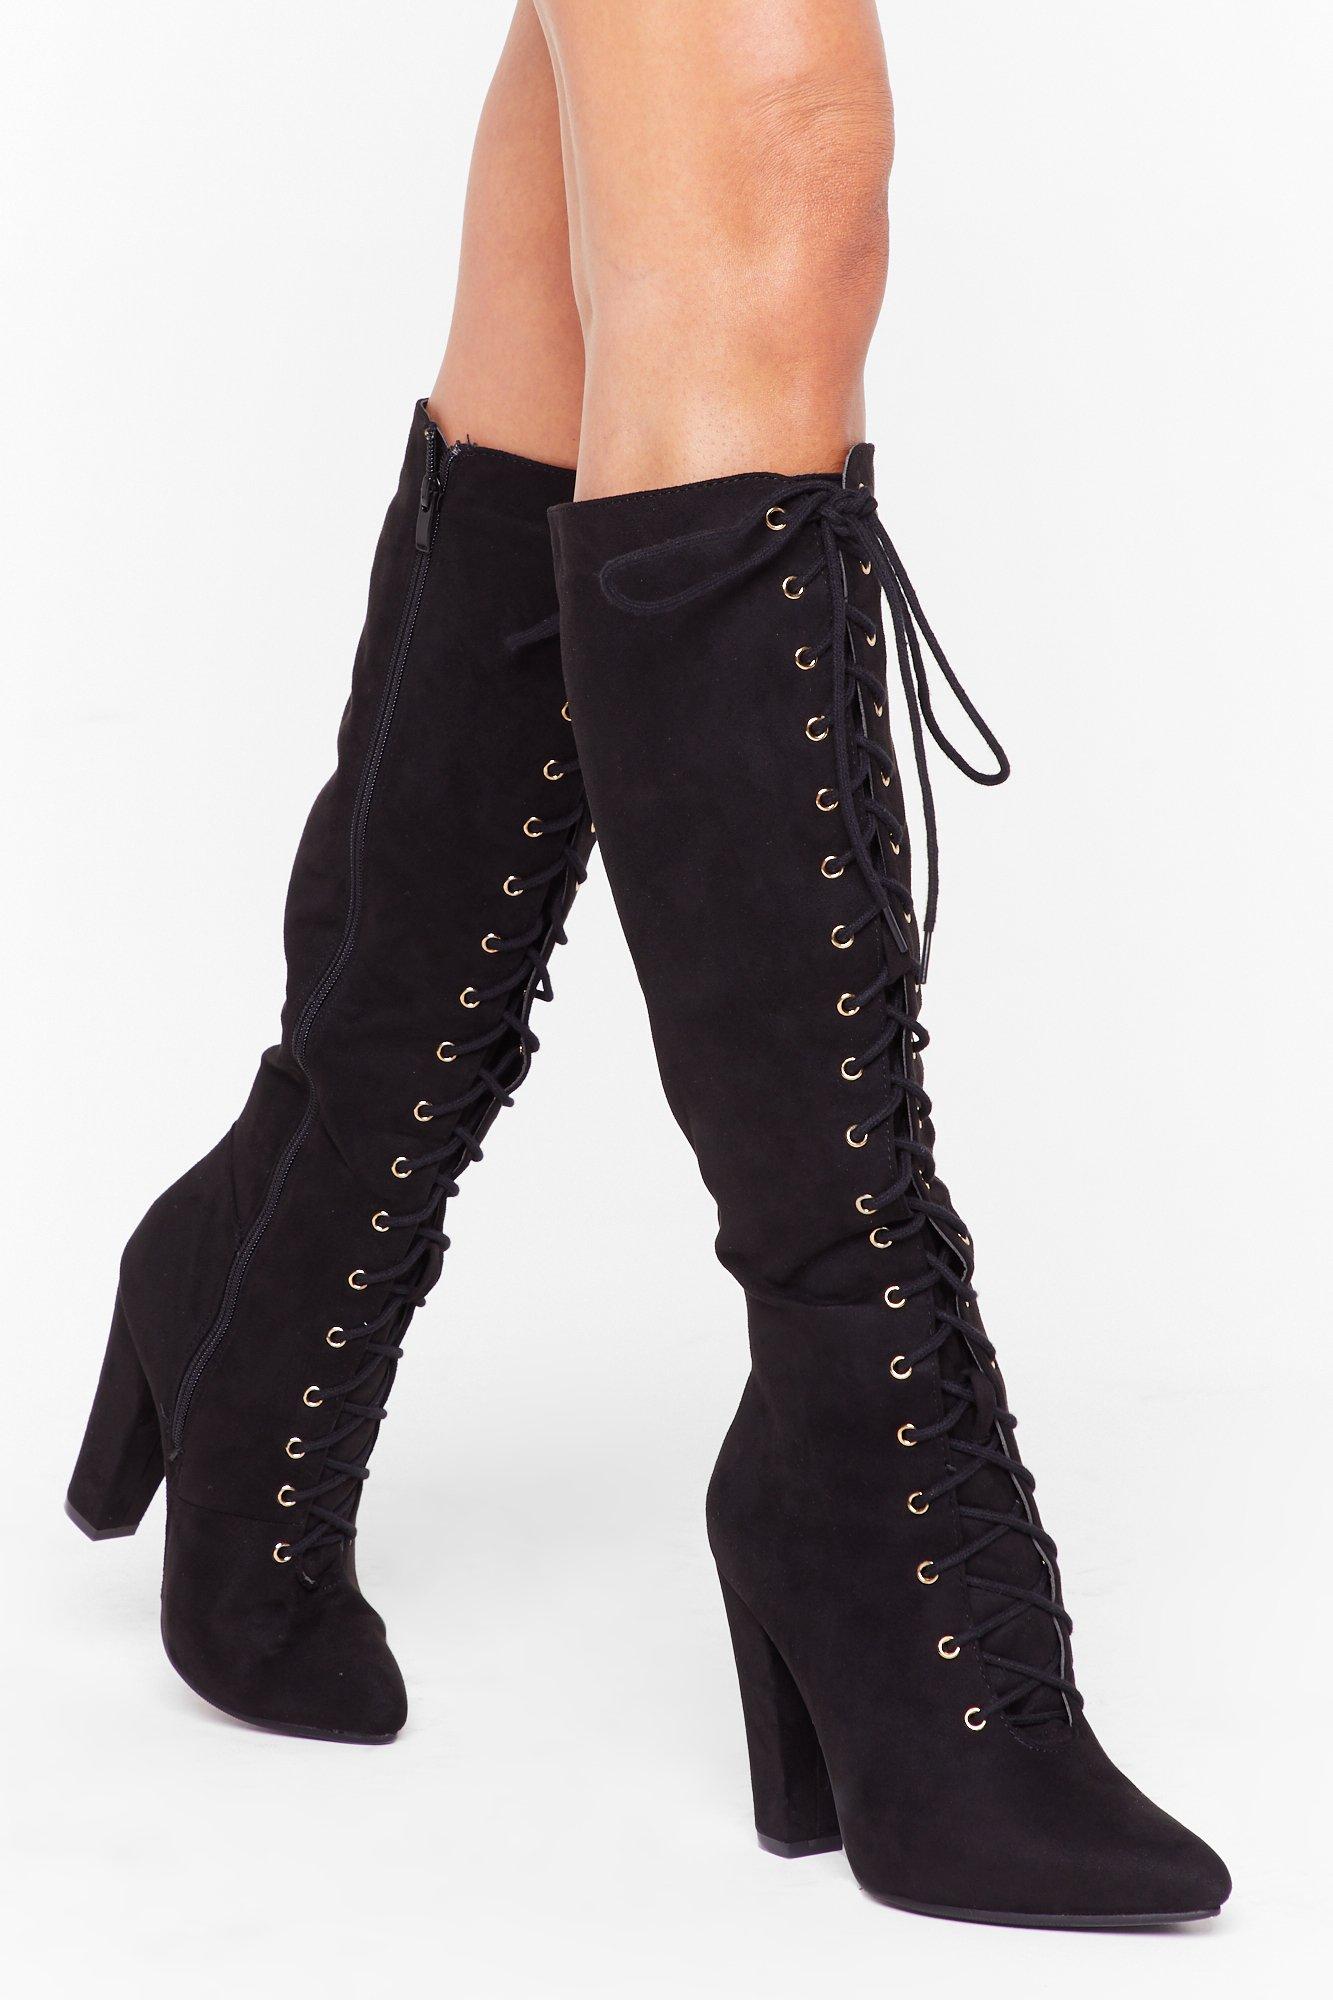 Details about   Vintage Ladies REAL Leather Knee High Boots Lace Block Low Heels Shoes Suede Hot 